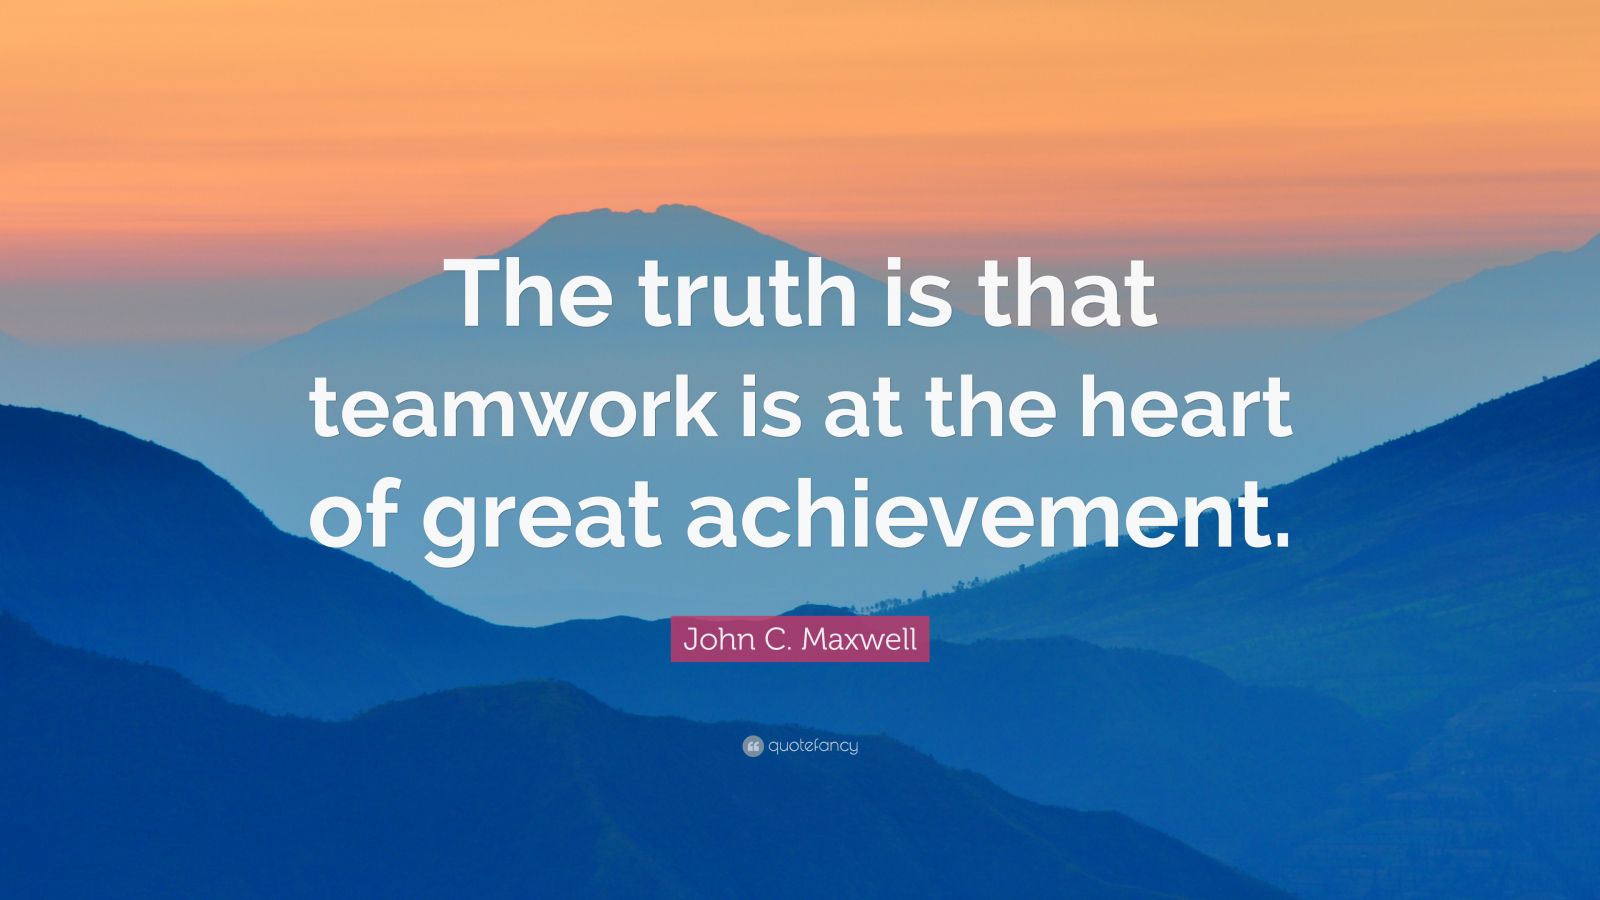 John C. Maxwell Quote: “The truth is that teamwork is at the heart of ...